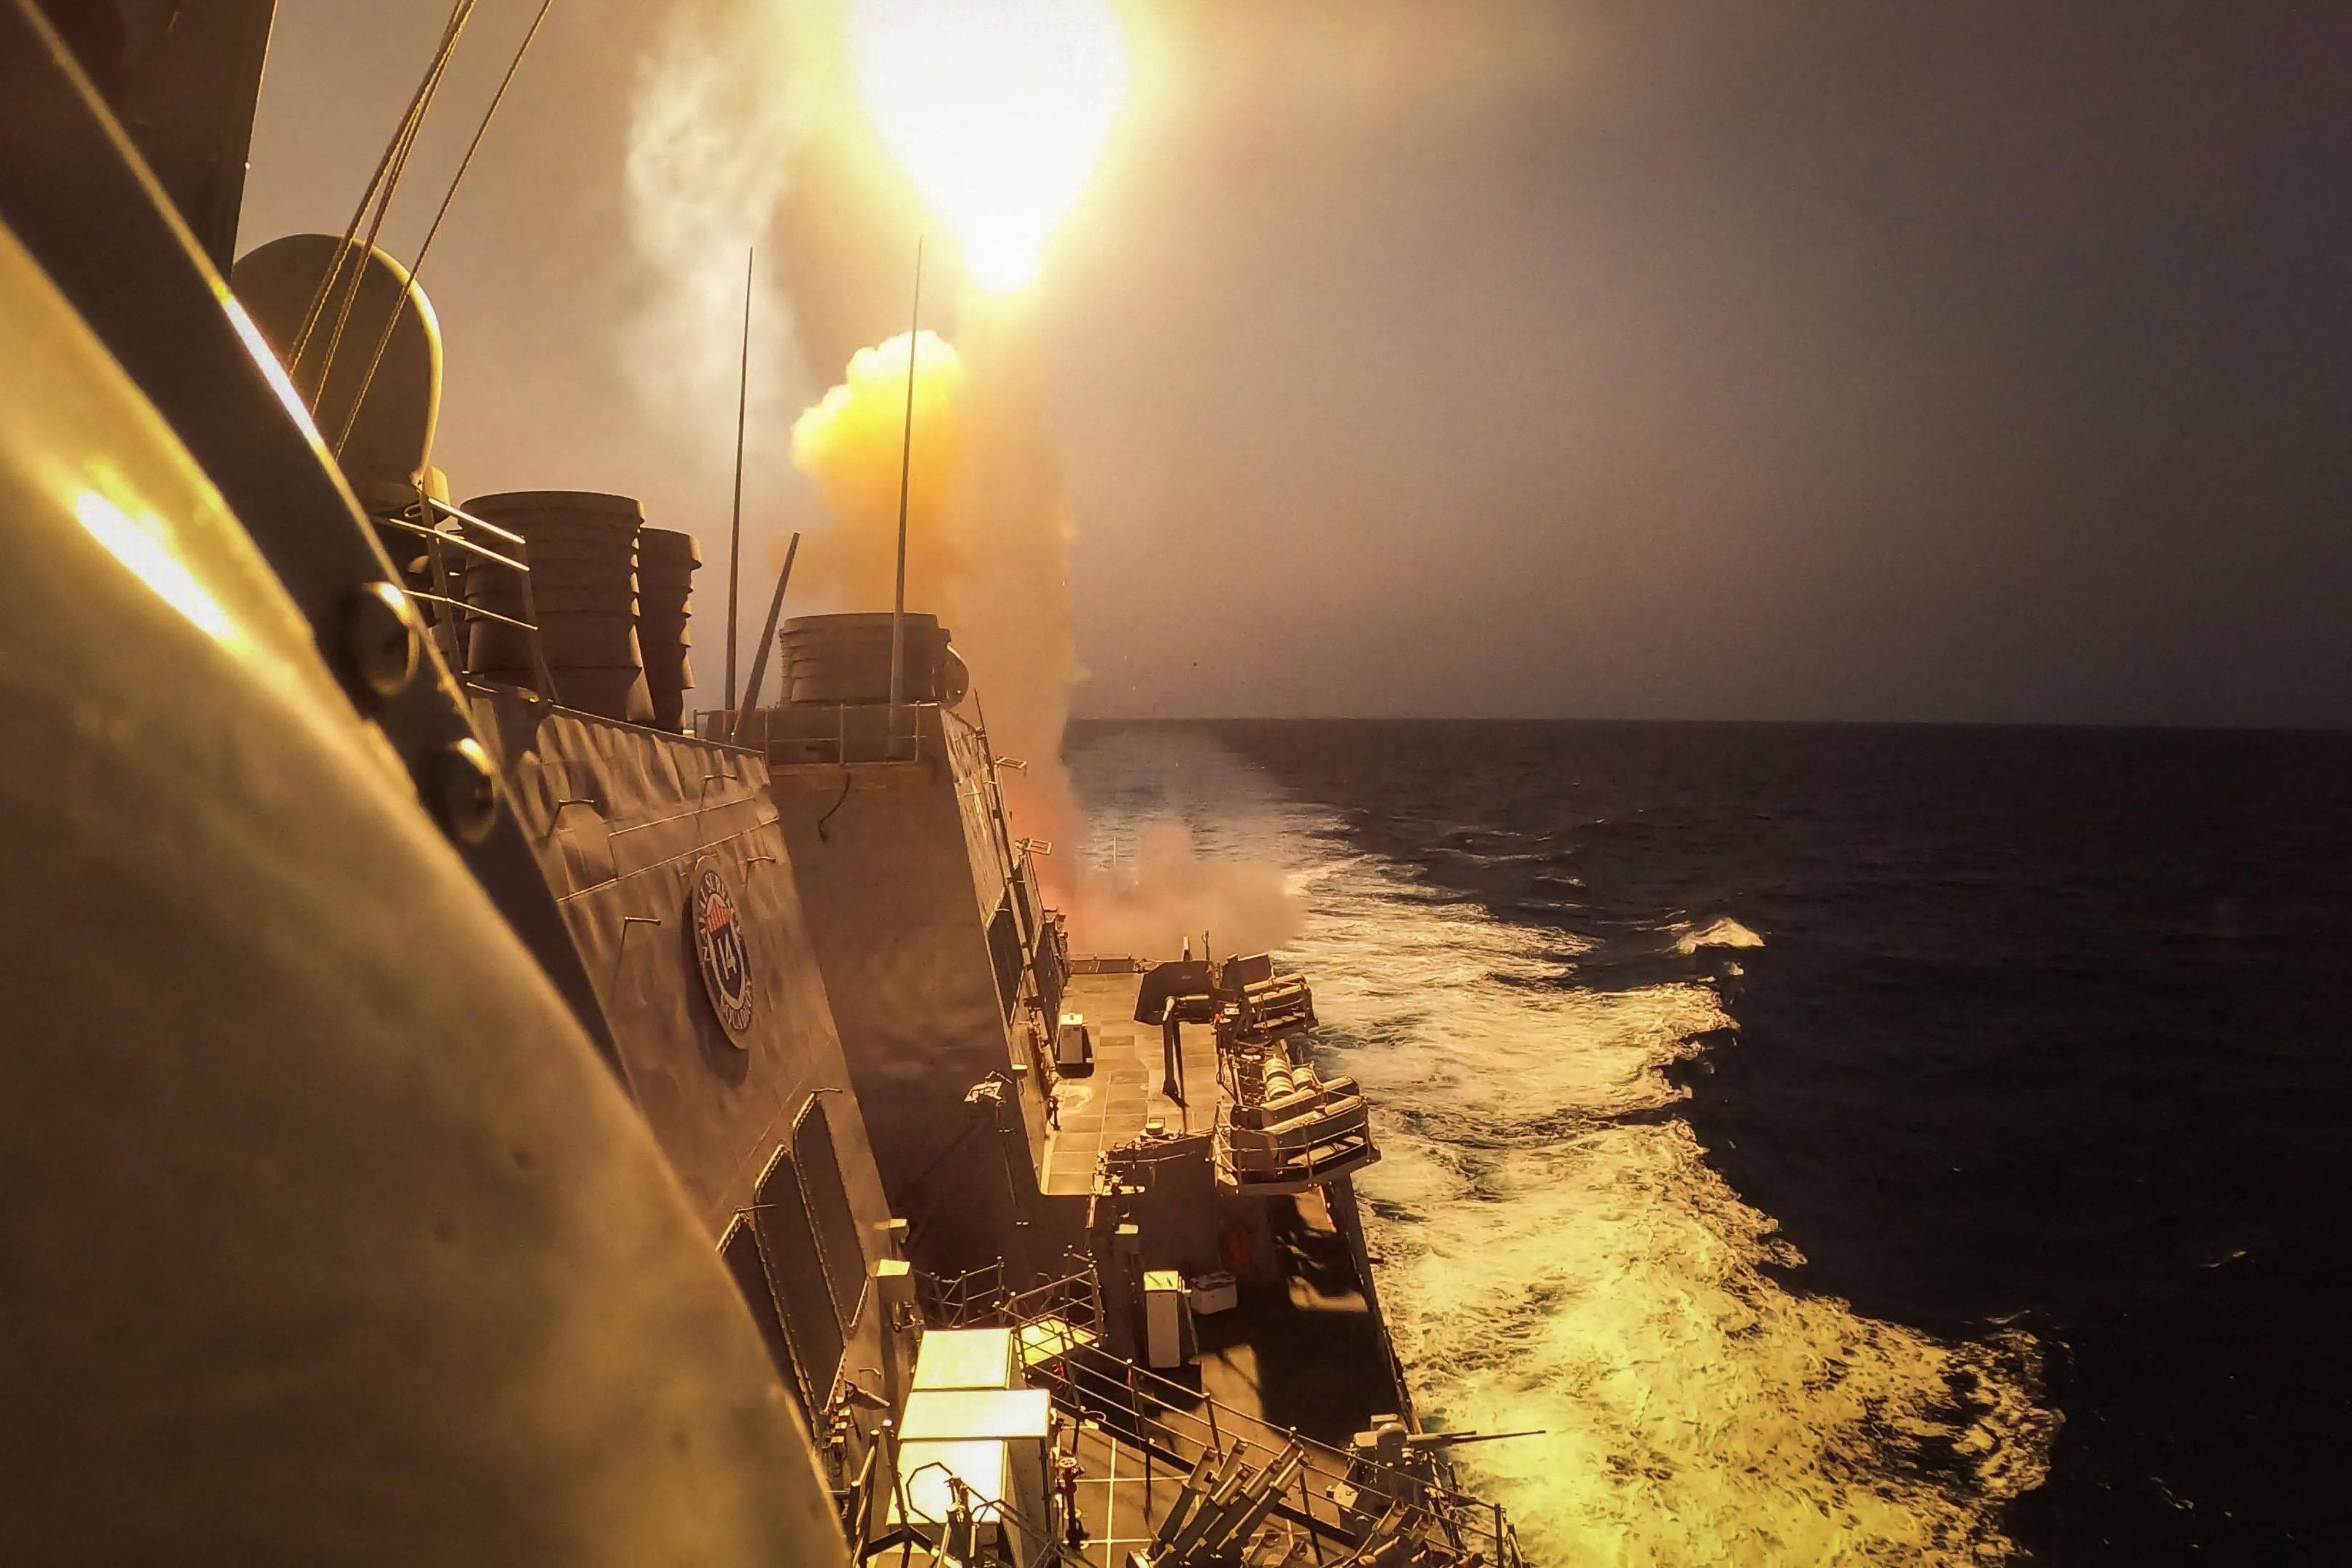 The Arleigh Burke-class guided-missile destroyer USS Carney (DDG 64) defeating a combination of Houthi missiles and unmanned aerial vehicles in the Red Sea. Photo: US Navy/AFP